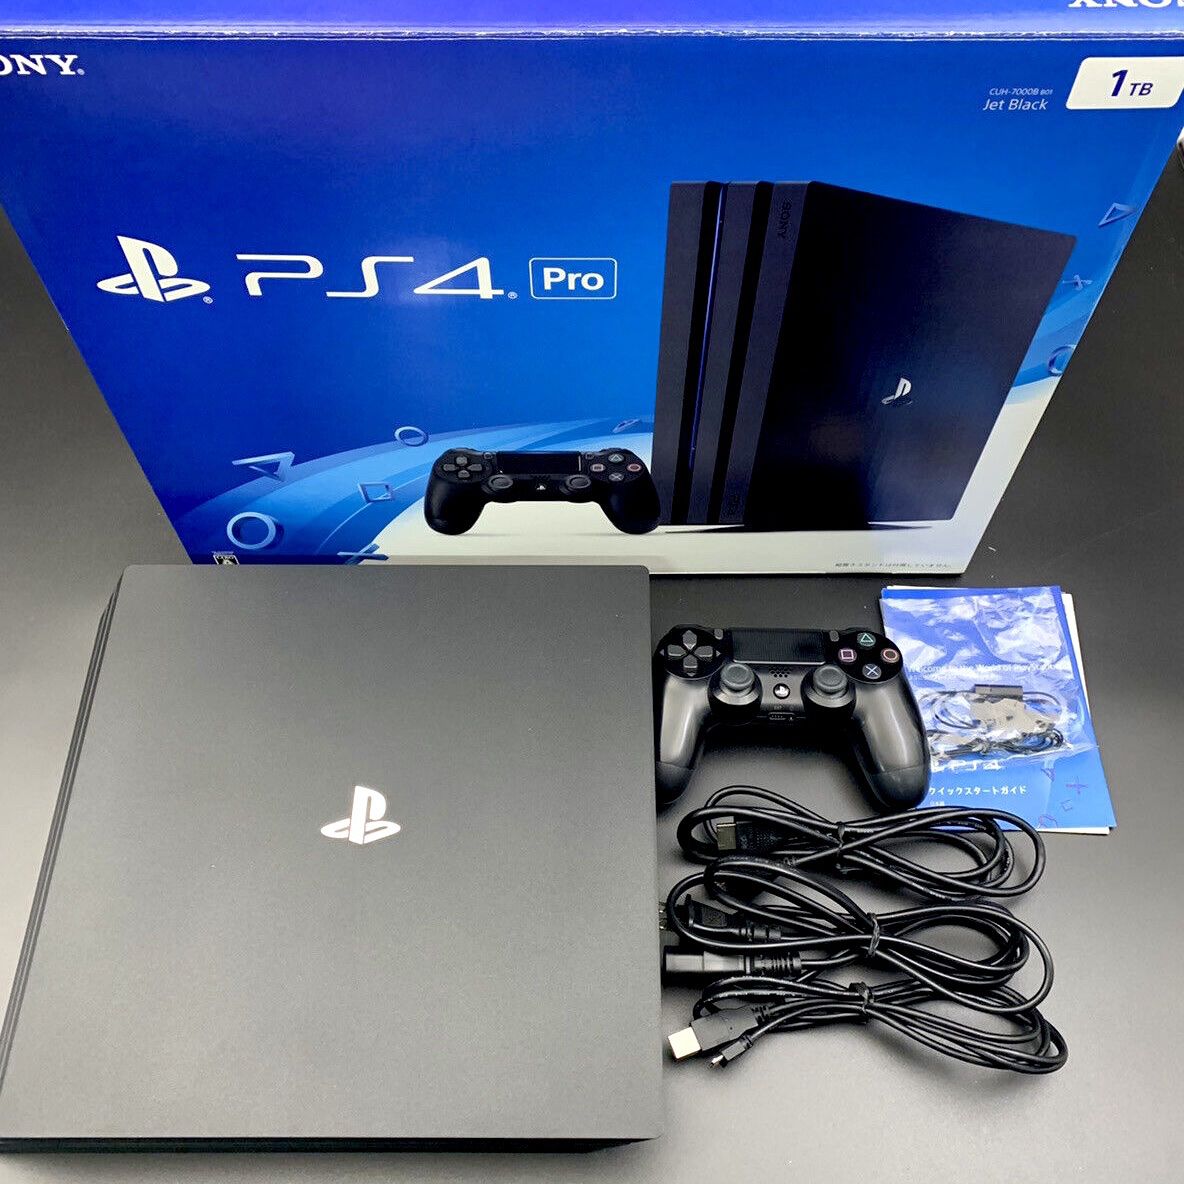 Ps4 Pro 1tb 4K Capable With Box And Cables 